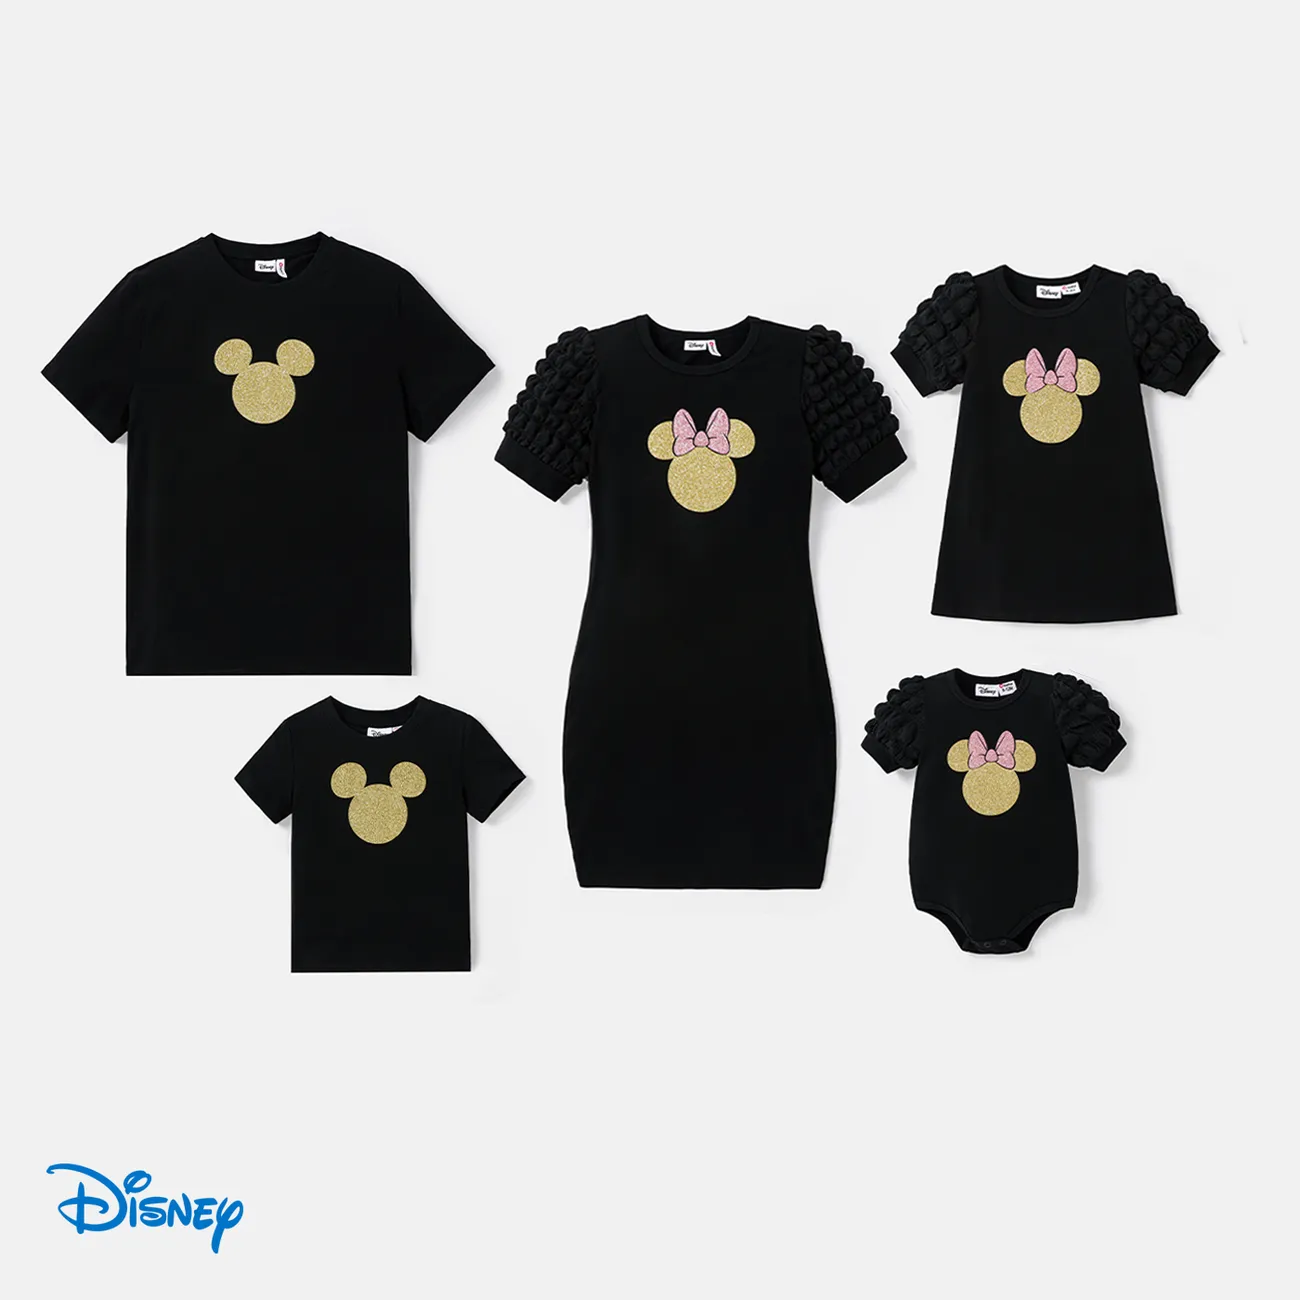 Disney Mickey and Friends Family Matching Black Cotton Short-sleeve Graphic Dress or Tee Black big image 1